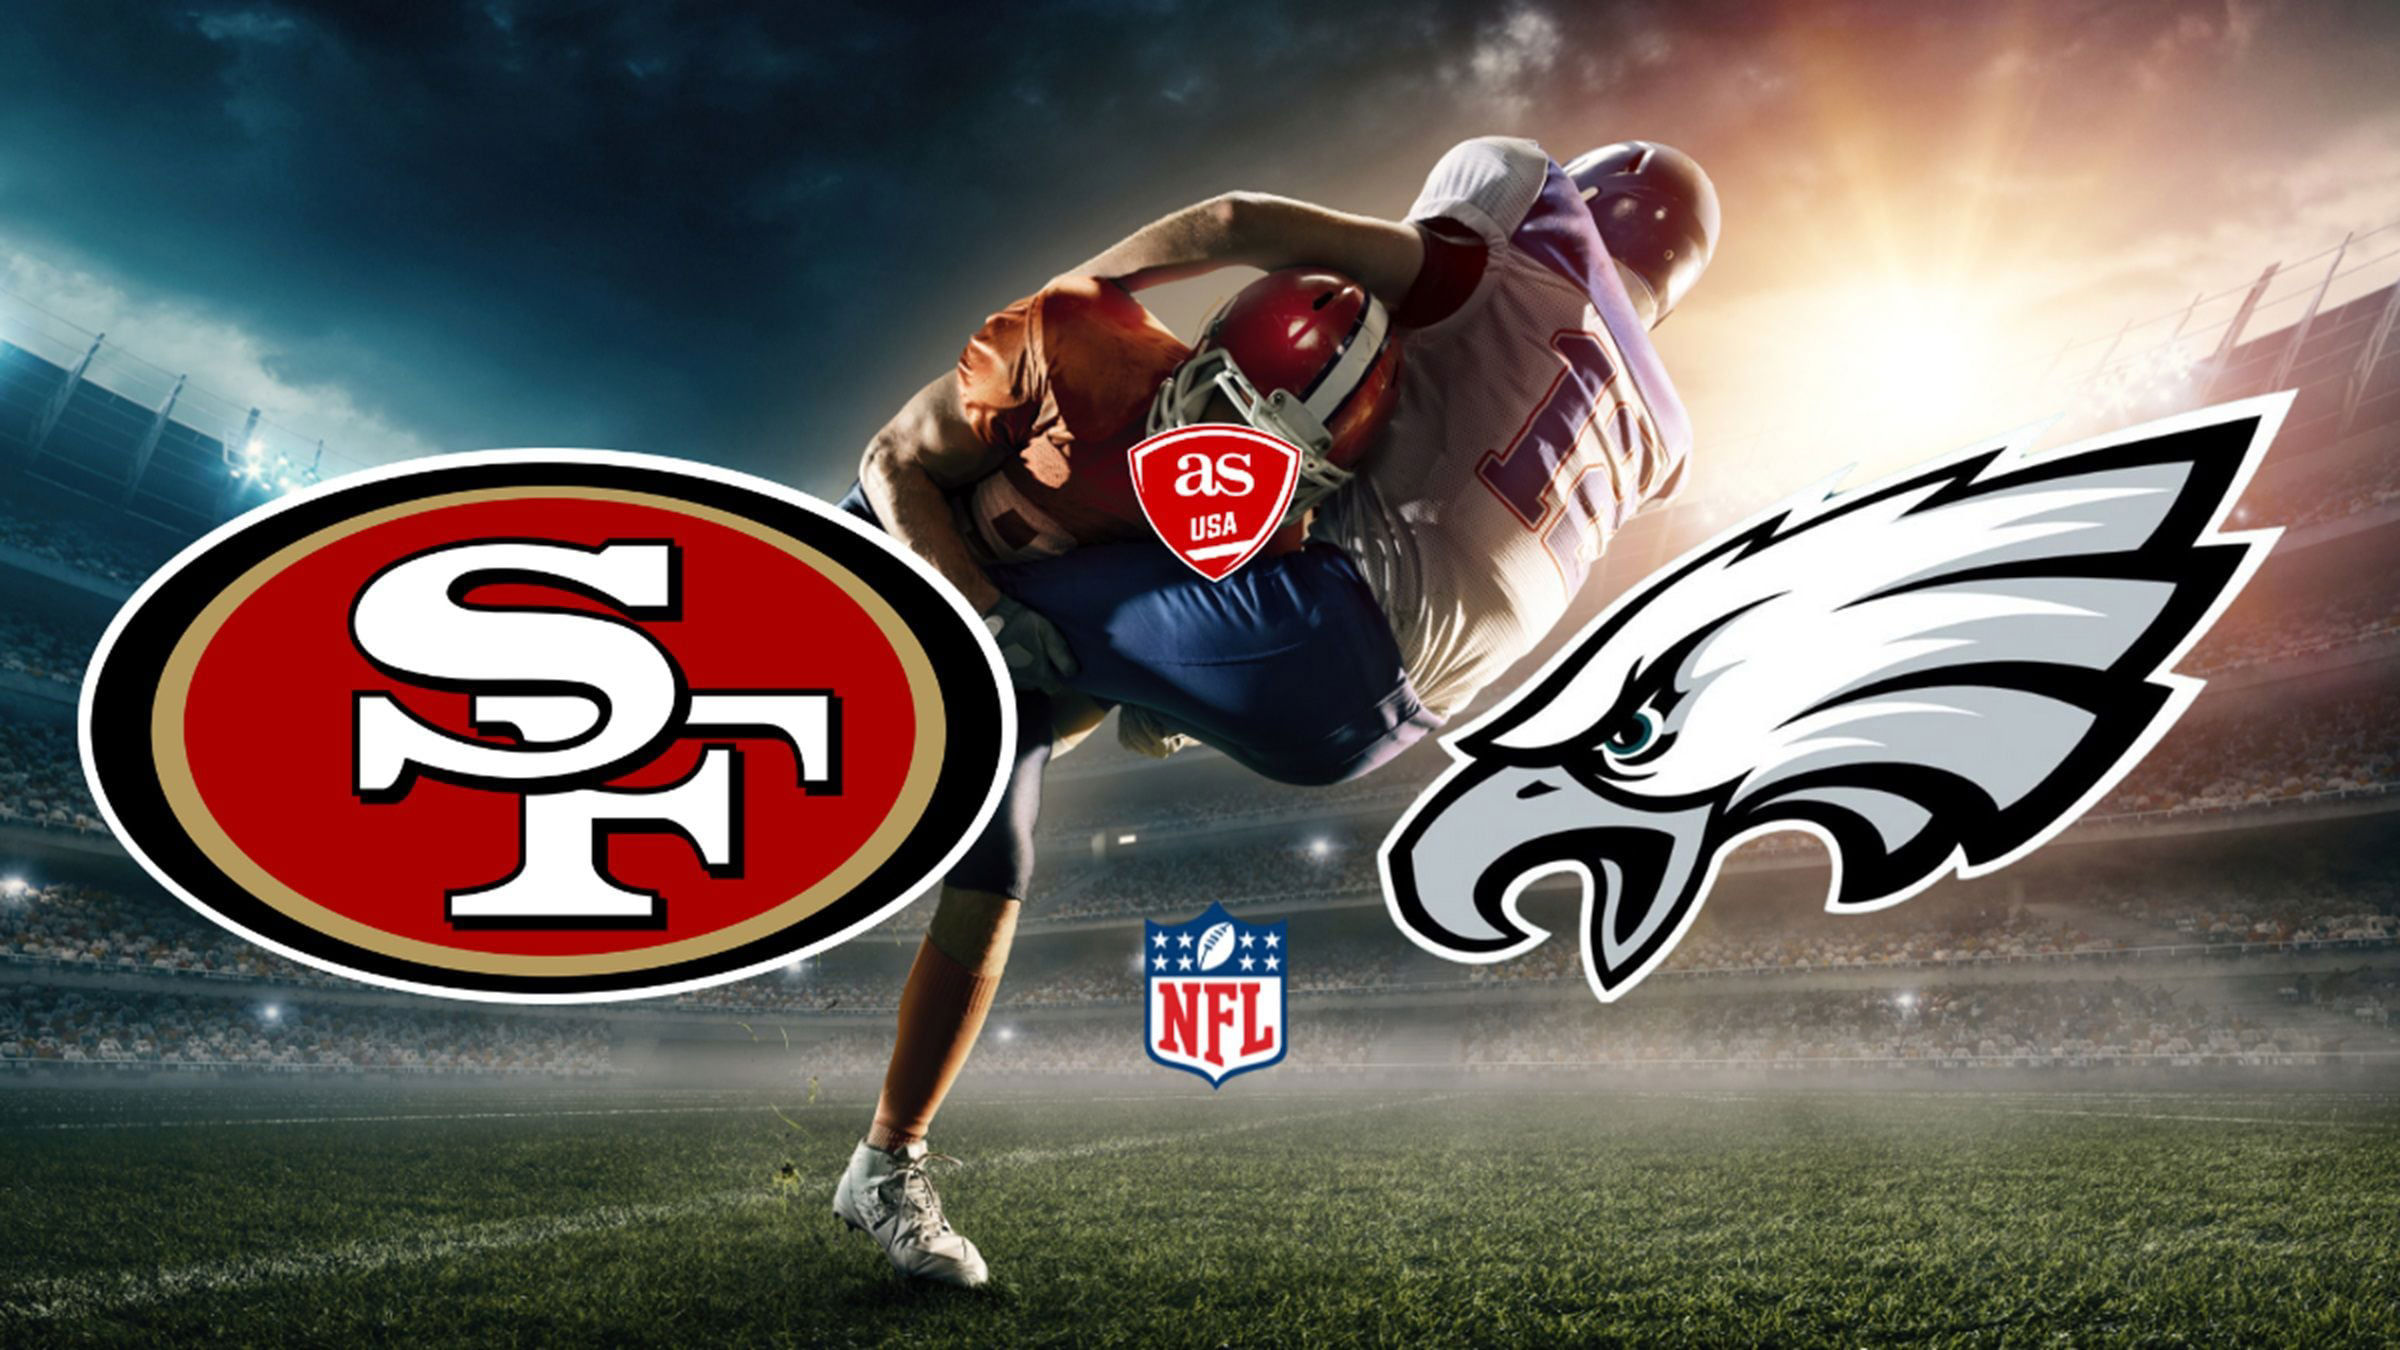 49ers vs Eagles times, how to watch on TV, stream online NFL